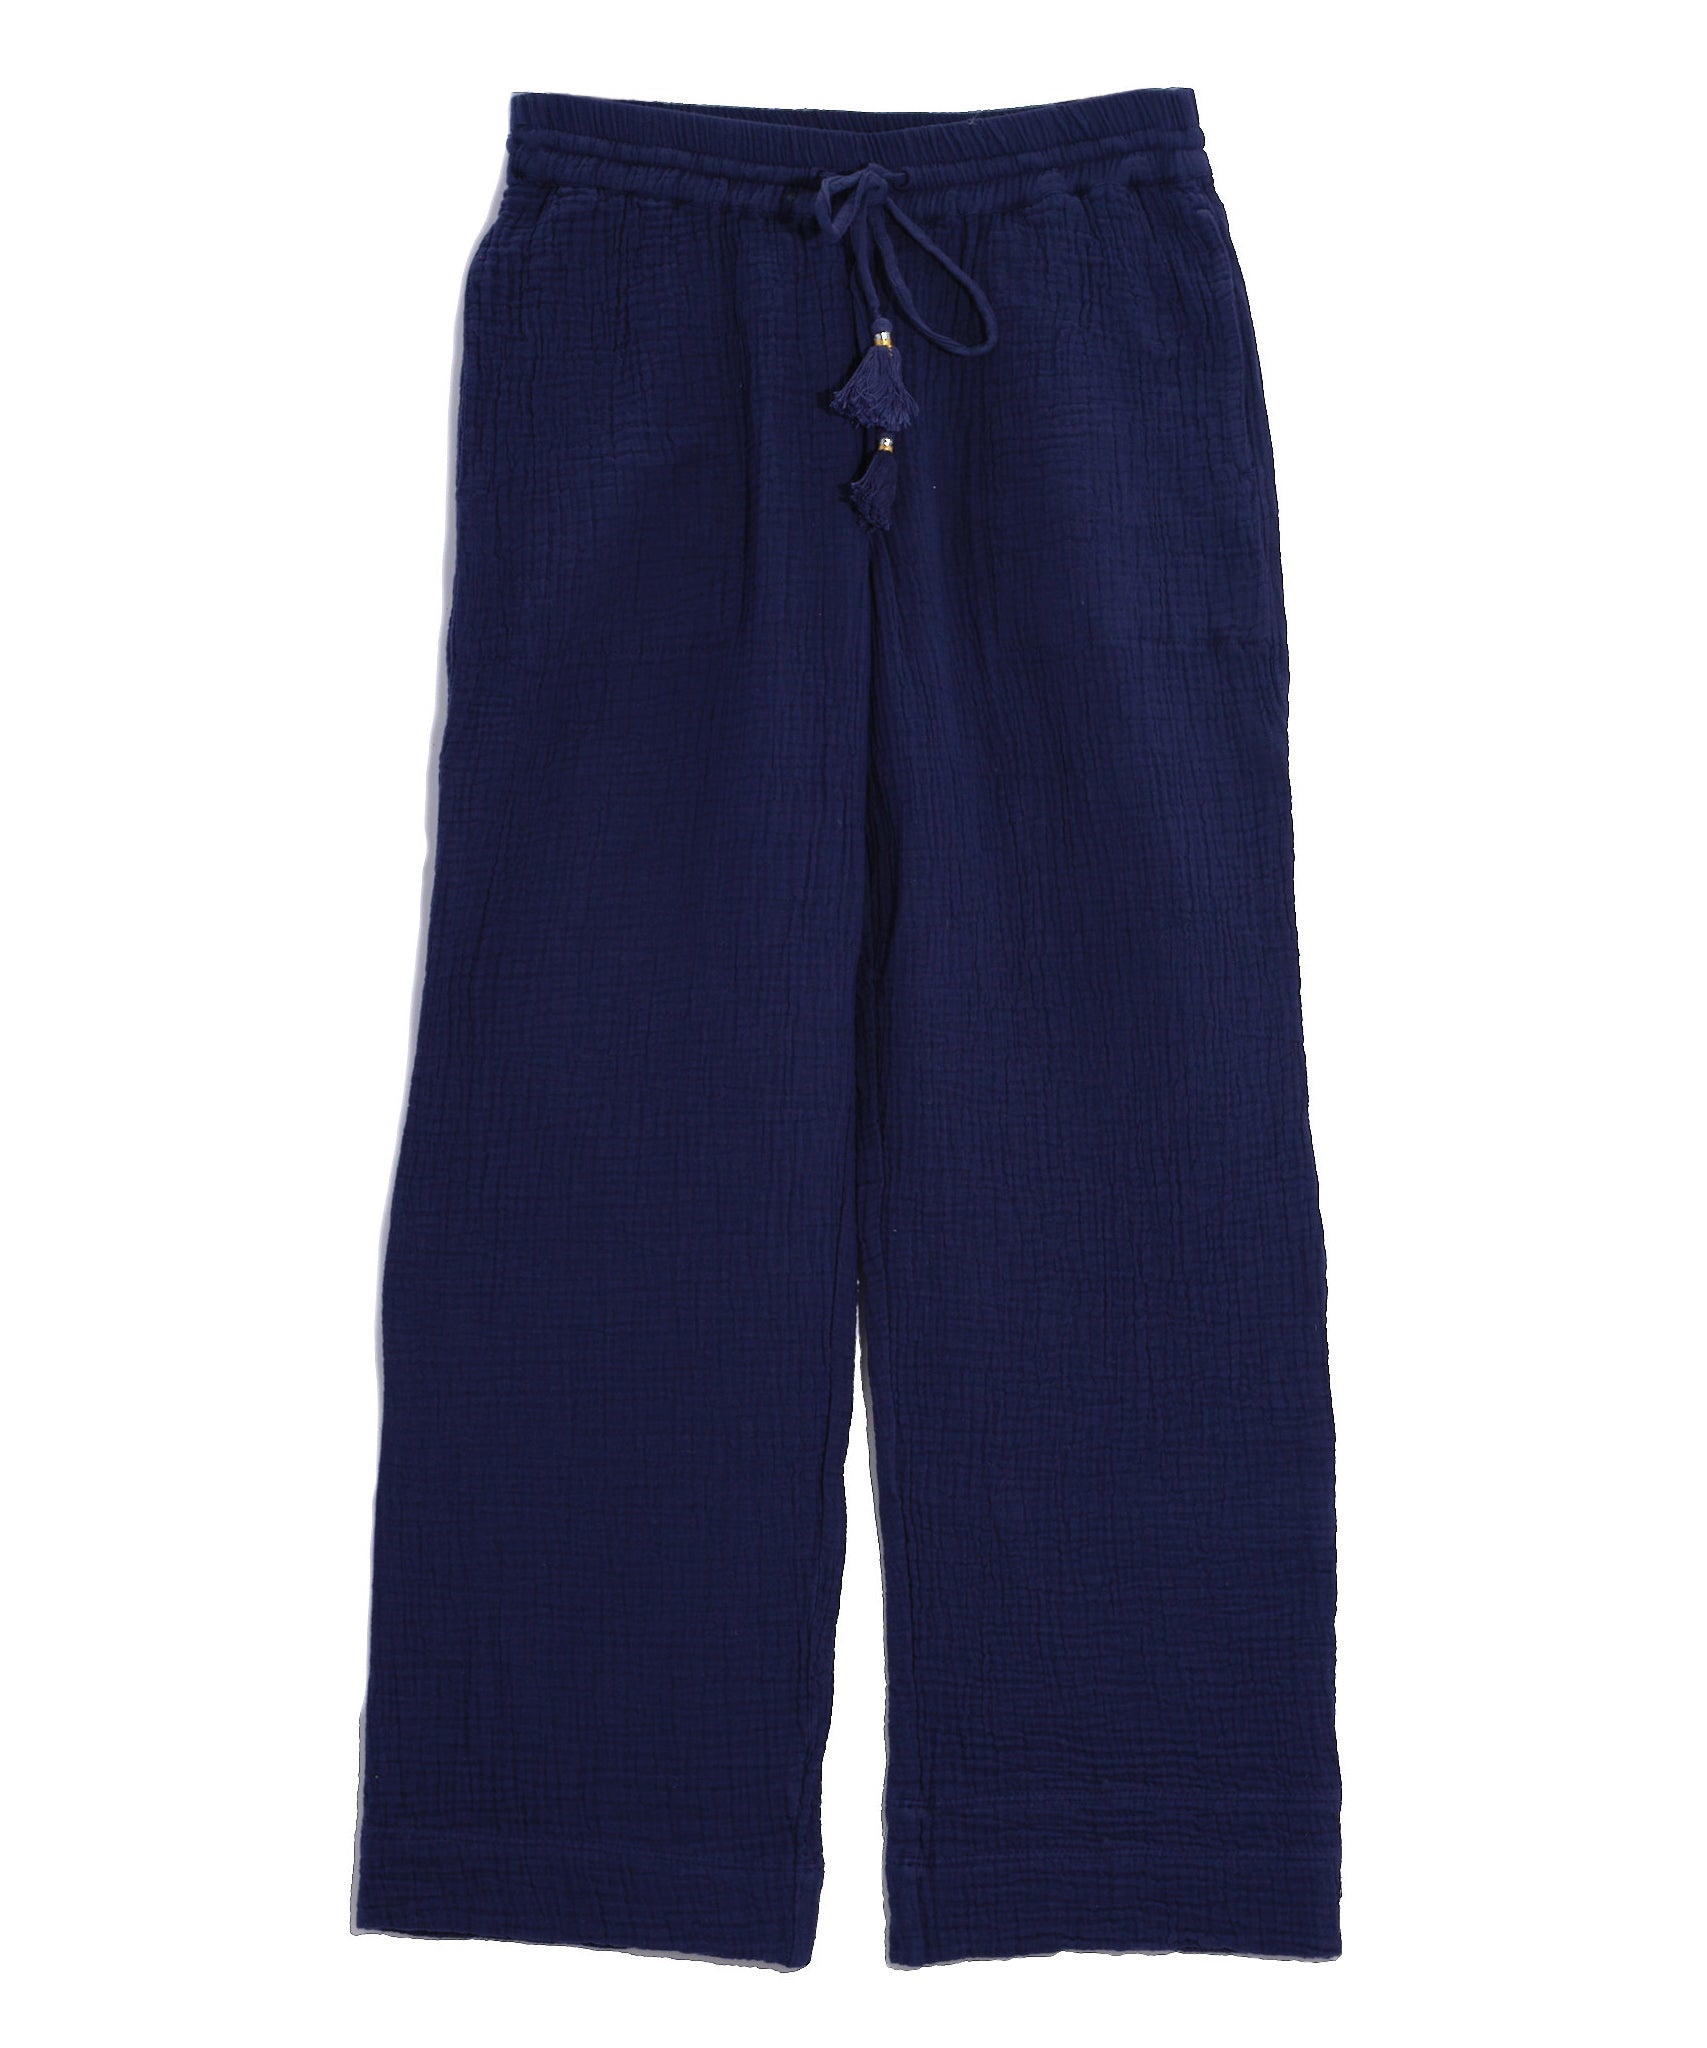 Supersoft Gauze Beach Pant in color Marine